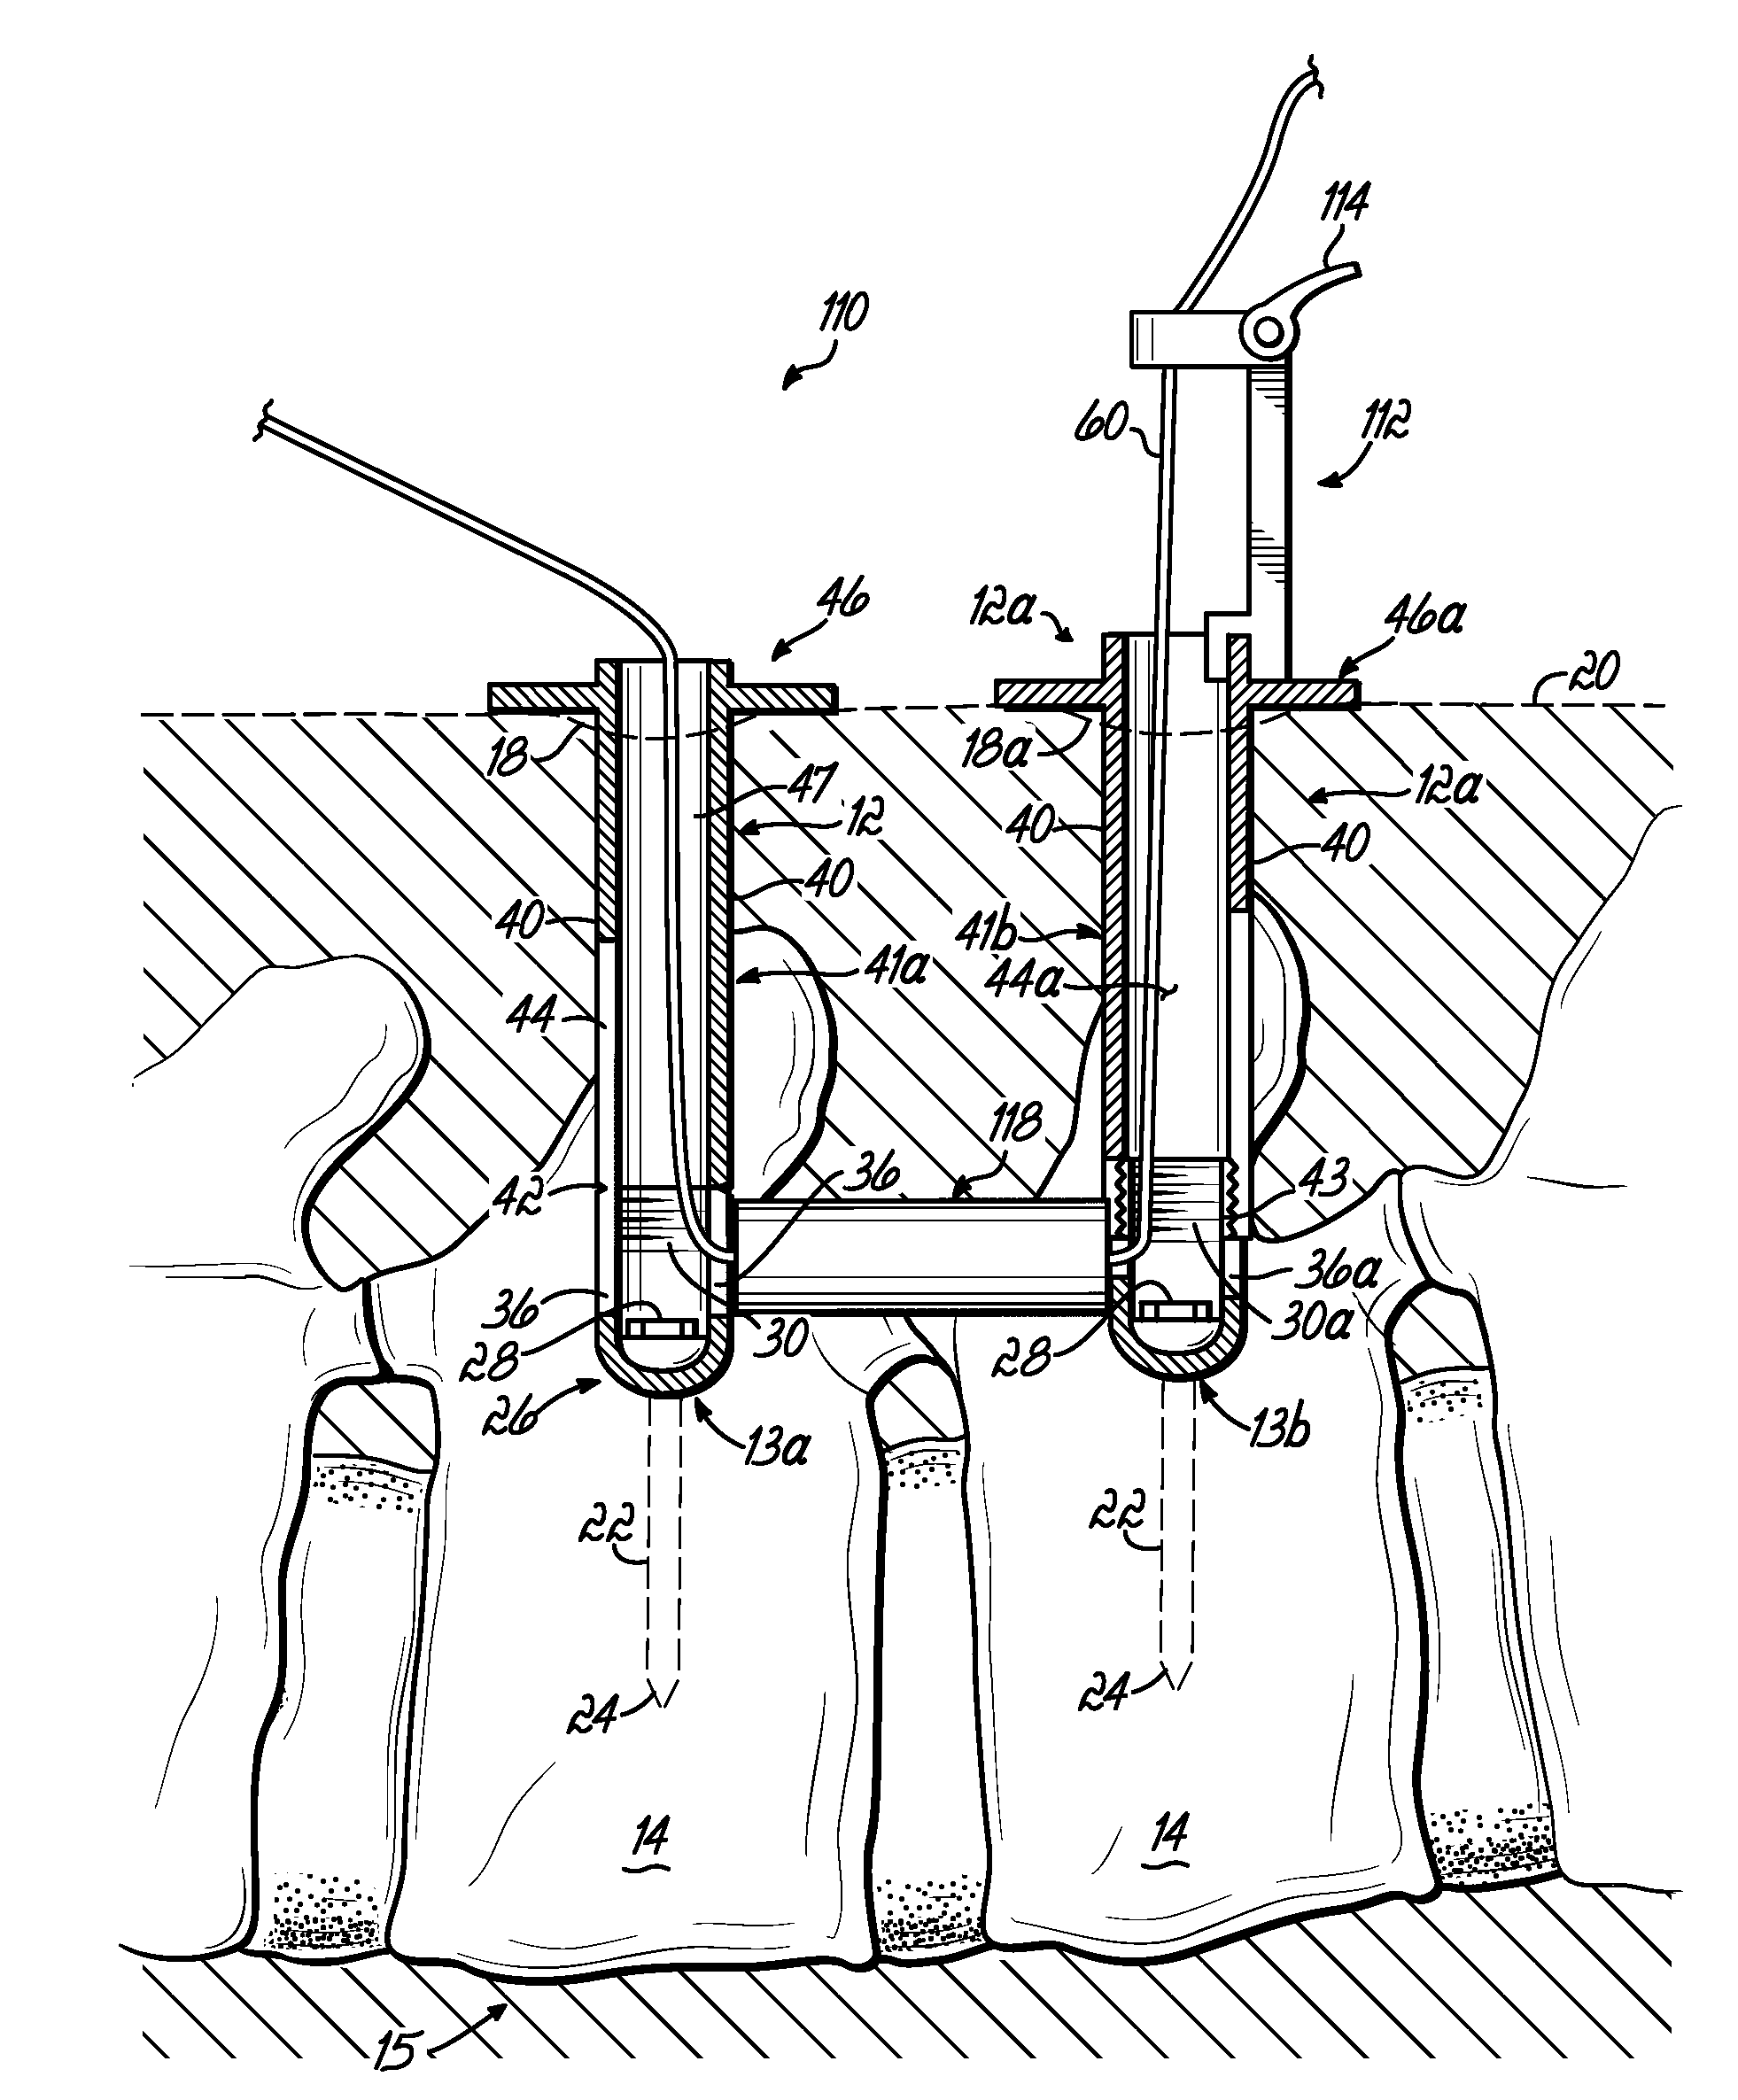 Instrumentation and associated techniques for minimally invasive spinal construct installation